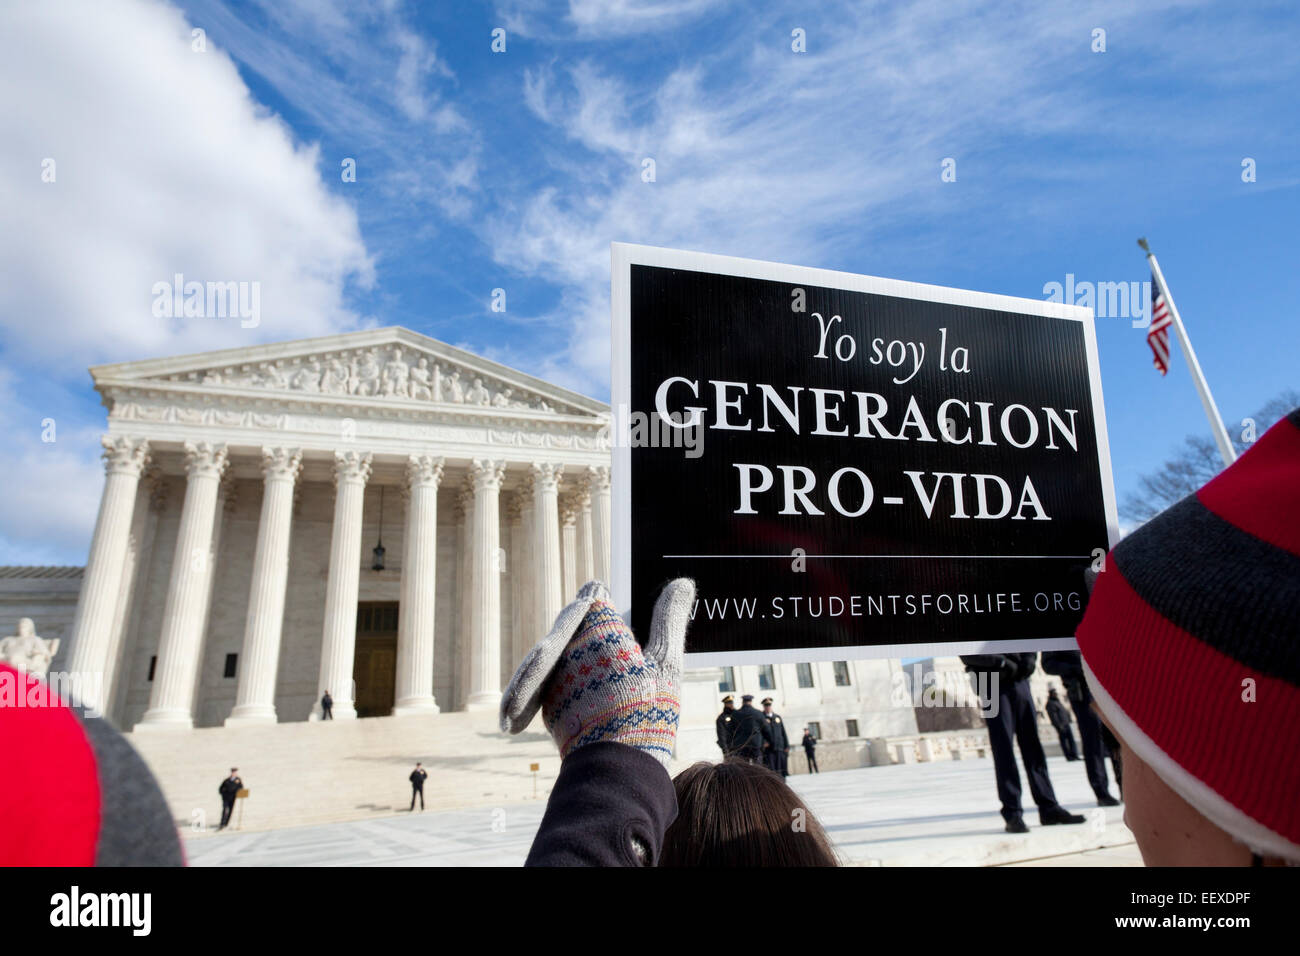 Washington DC, USA. 22nd Jan, 2015. Pro-Life supporters march carrying signs toward the Supreme Court building. Pictured: Activist holding Pro-Vida (Pro-Life) sign. Credit:  B Christopher/Alamy Live News Stock Photo